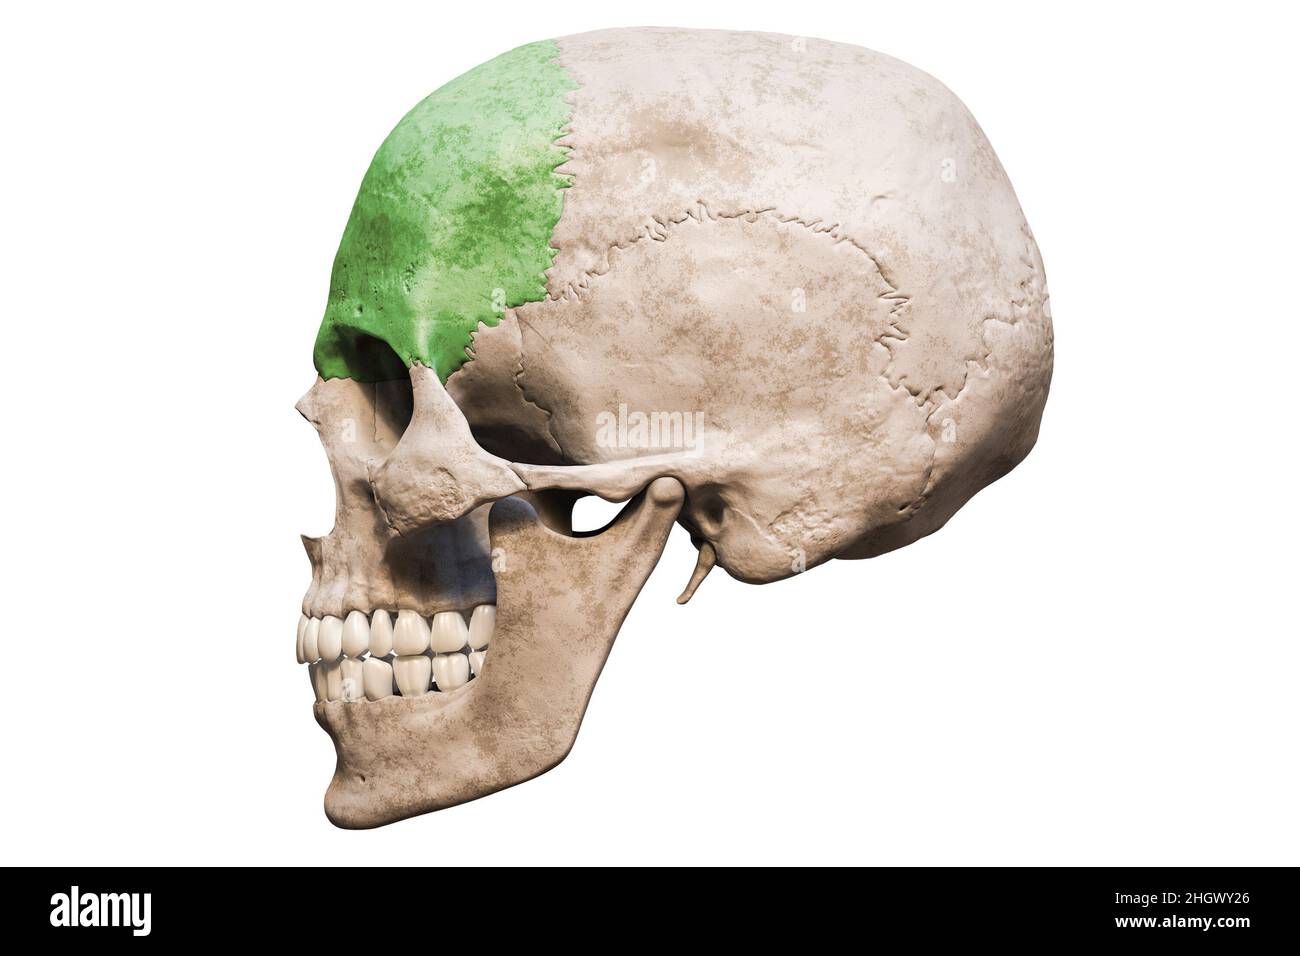 Anatomically accurate human male skull with colorized frontal bone lateral or profile view isolated on white background with copy space 3D rendering i Stock Photo